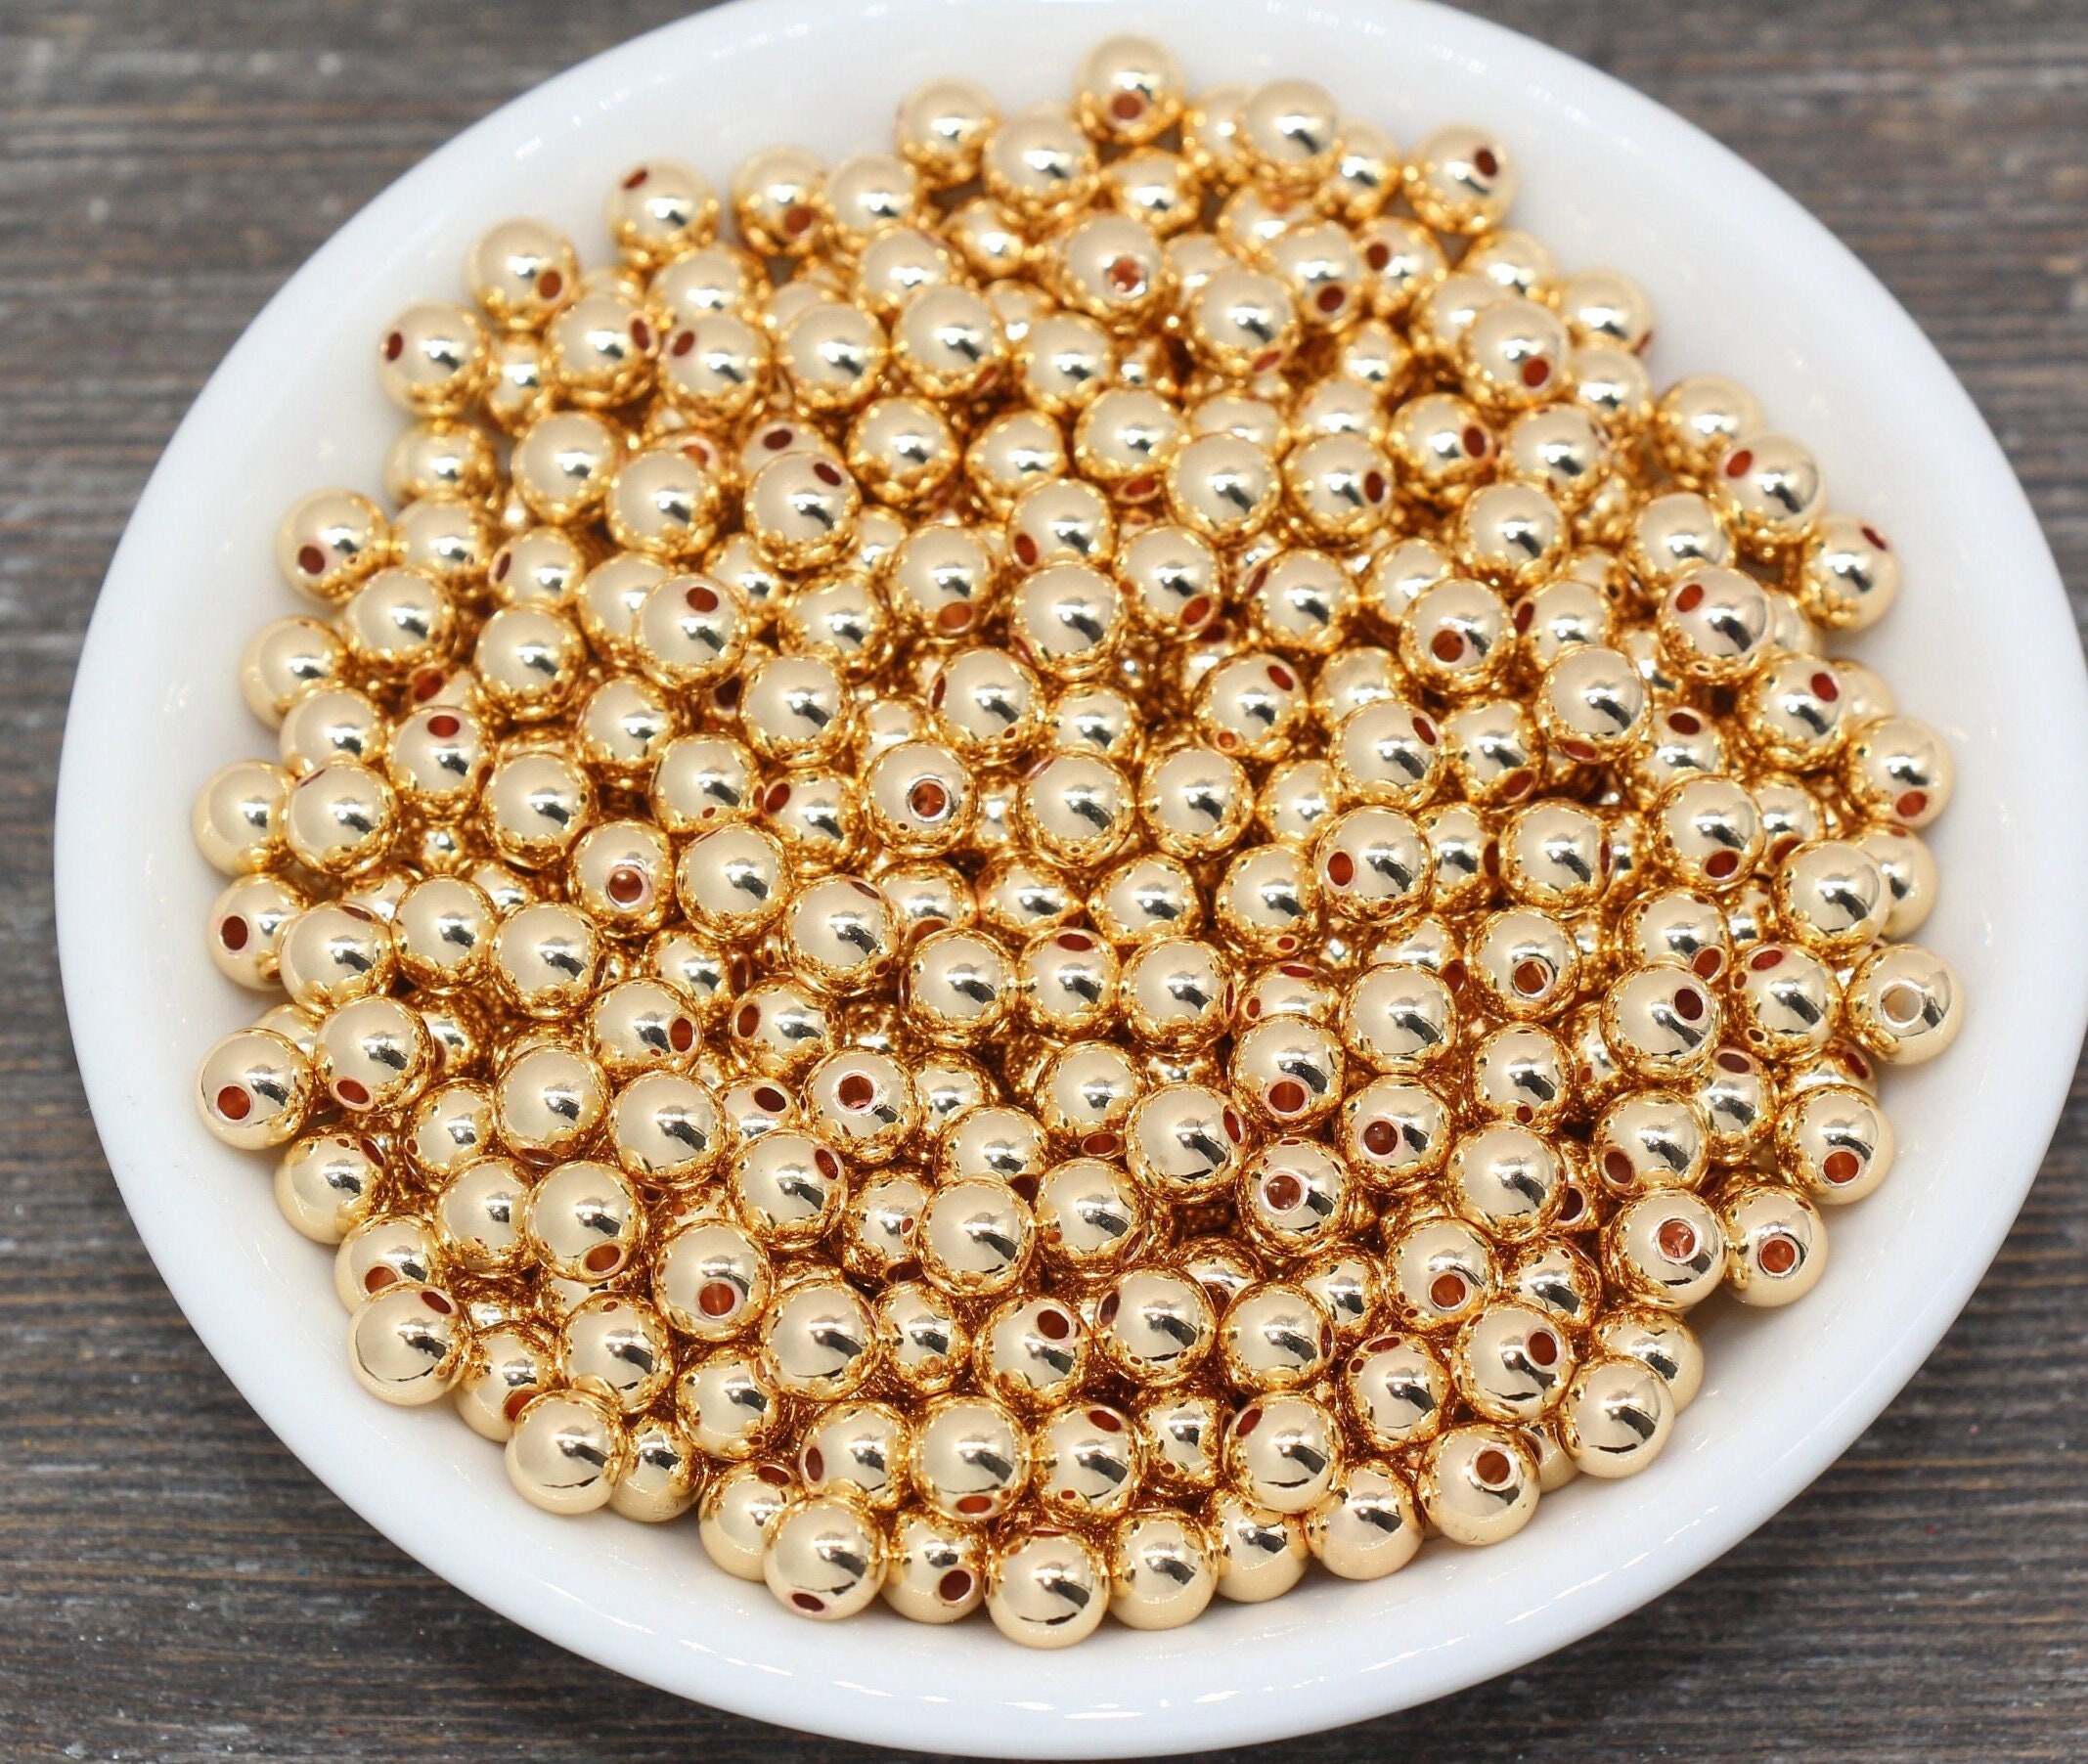 4mm 179pcs Gold Beads, Gold Spacer Beads for Jewelry Making Ball Beads 